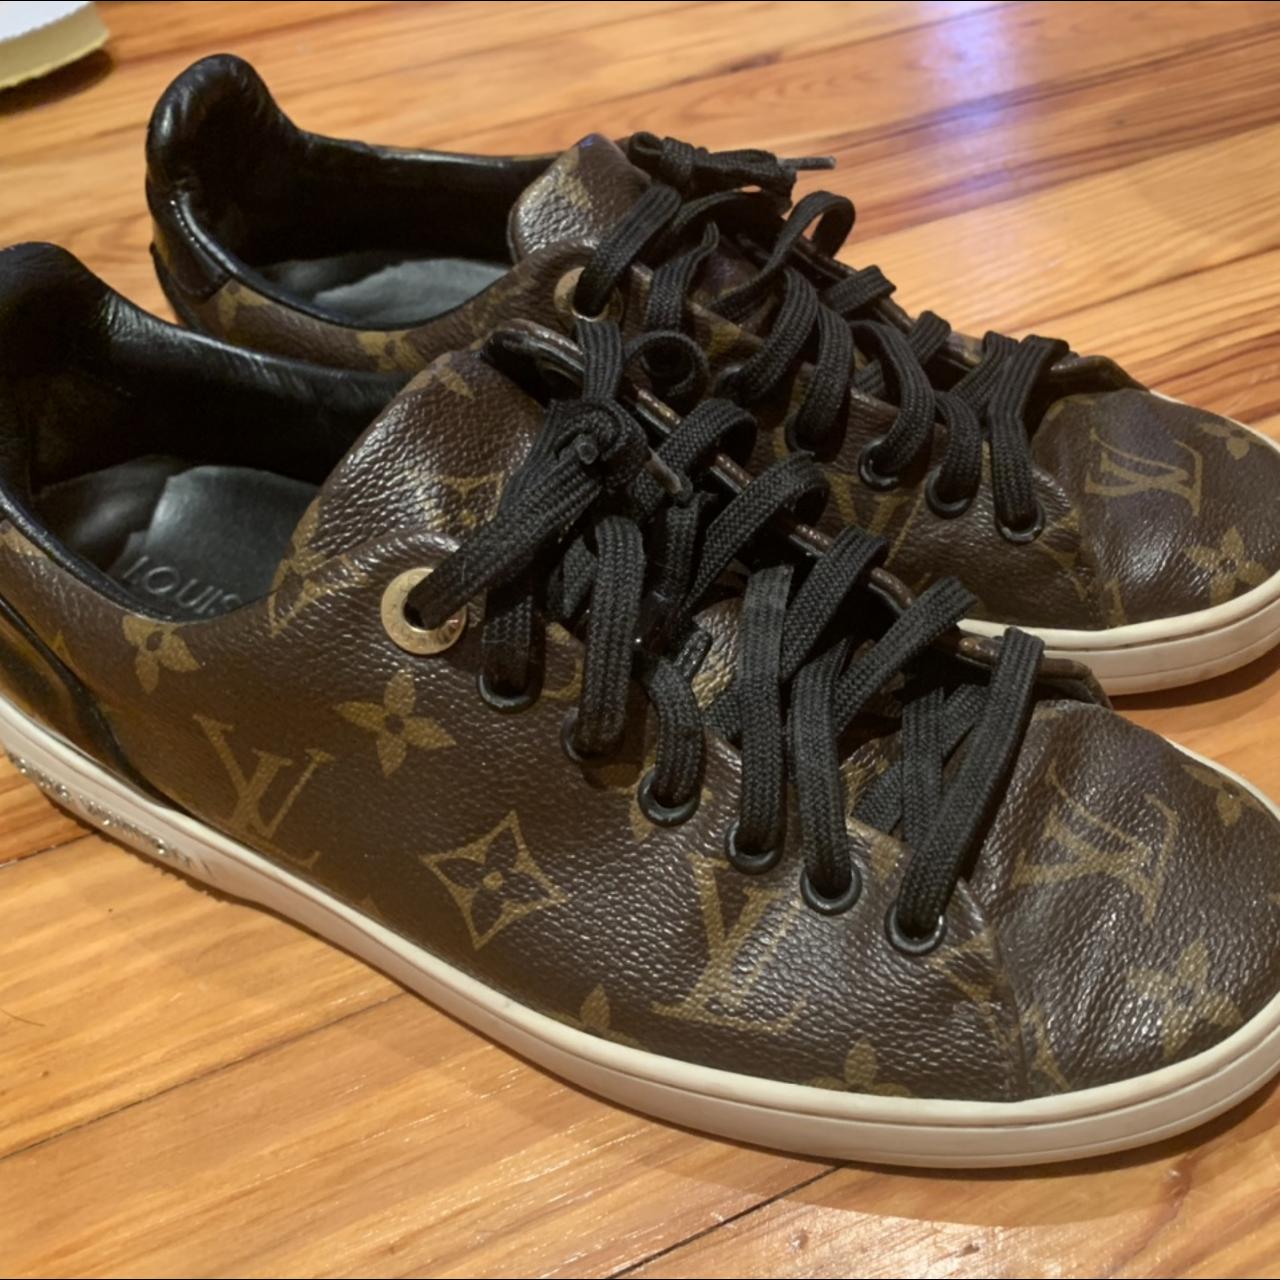 Louis Vuitton Frontrow Lace Up Sneakers in Brown Monogram Canvas